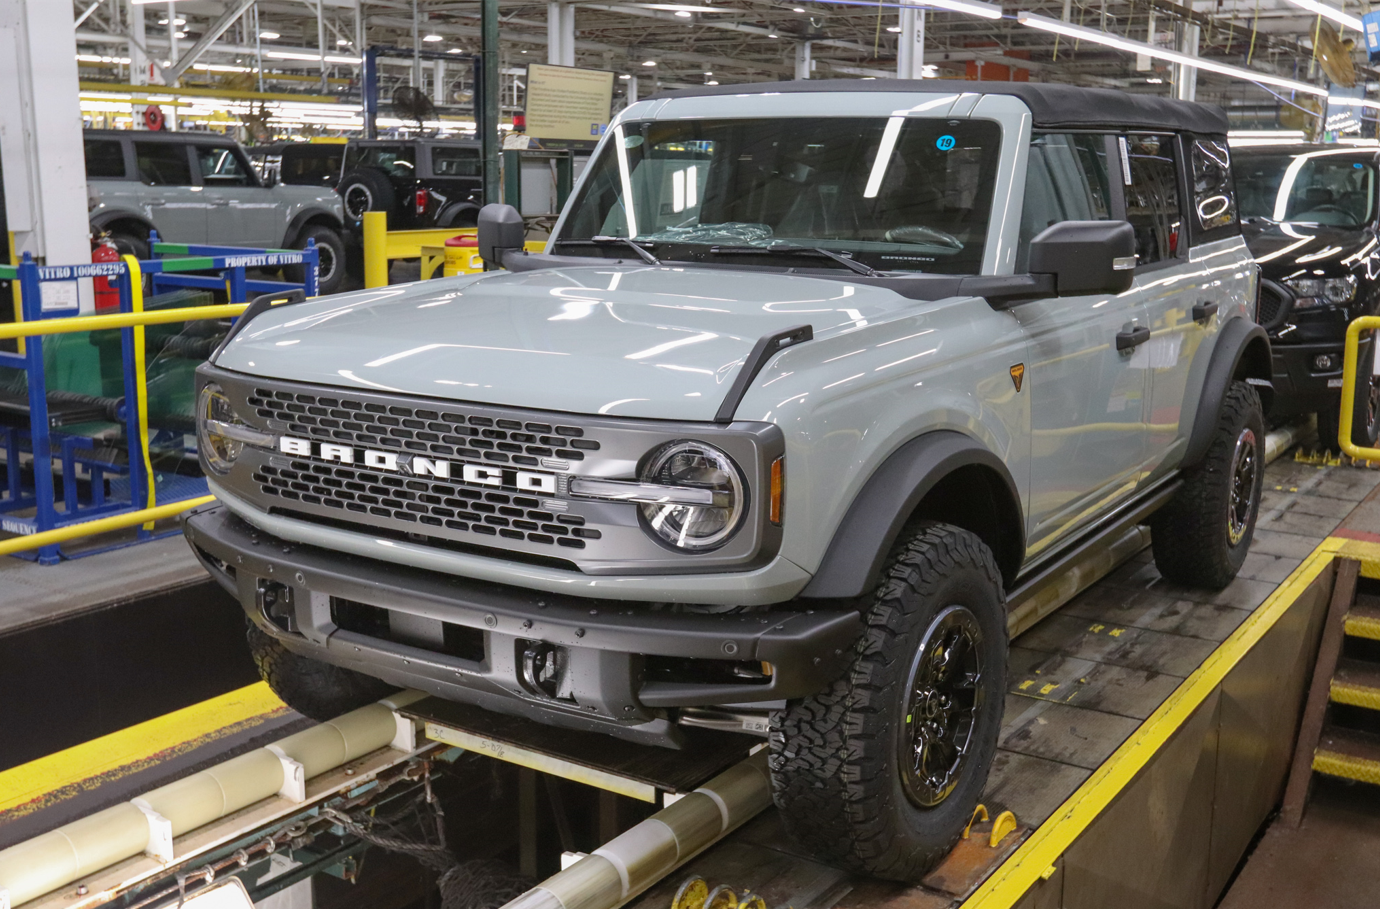 Ford Bronco Post Your Bronco Production Line Pics! (From Ford Emails Starting Today) 1634581368667